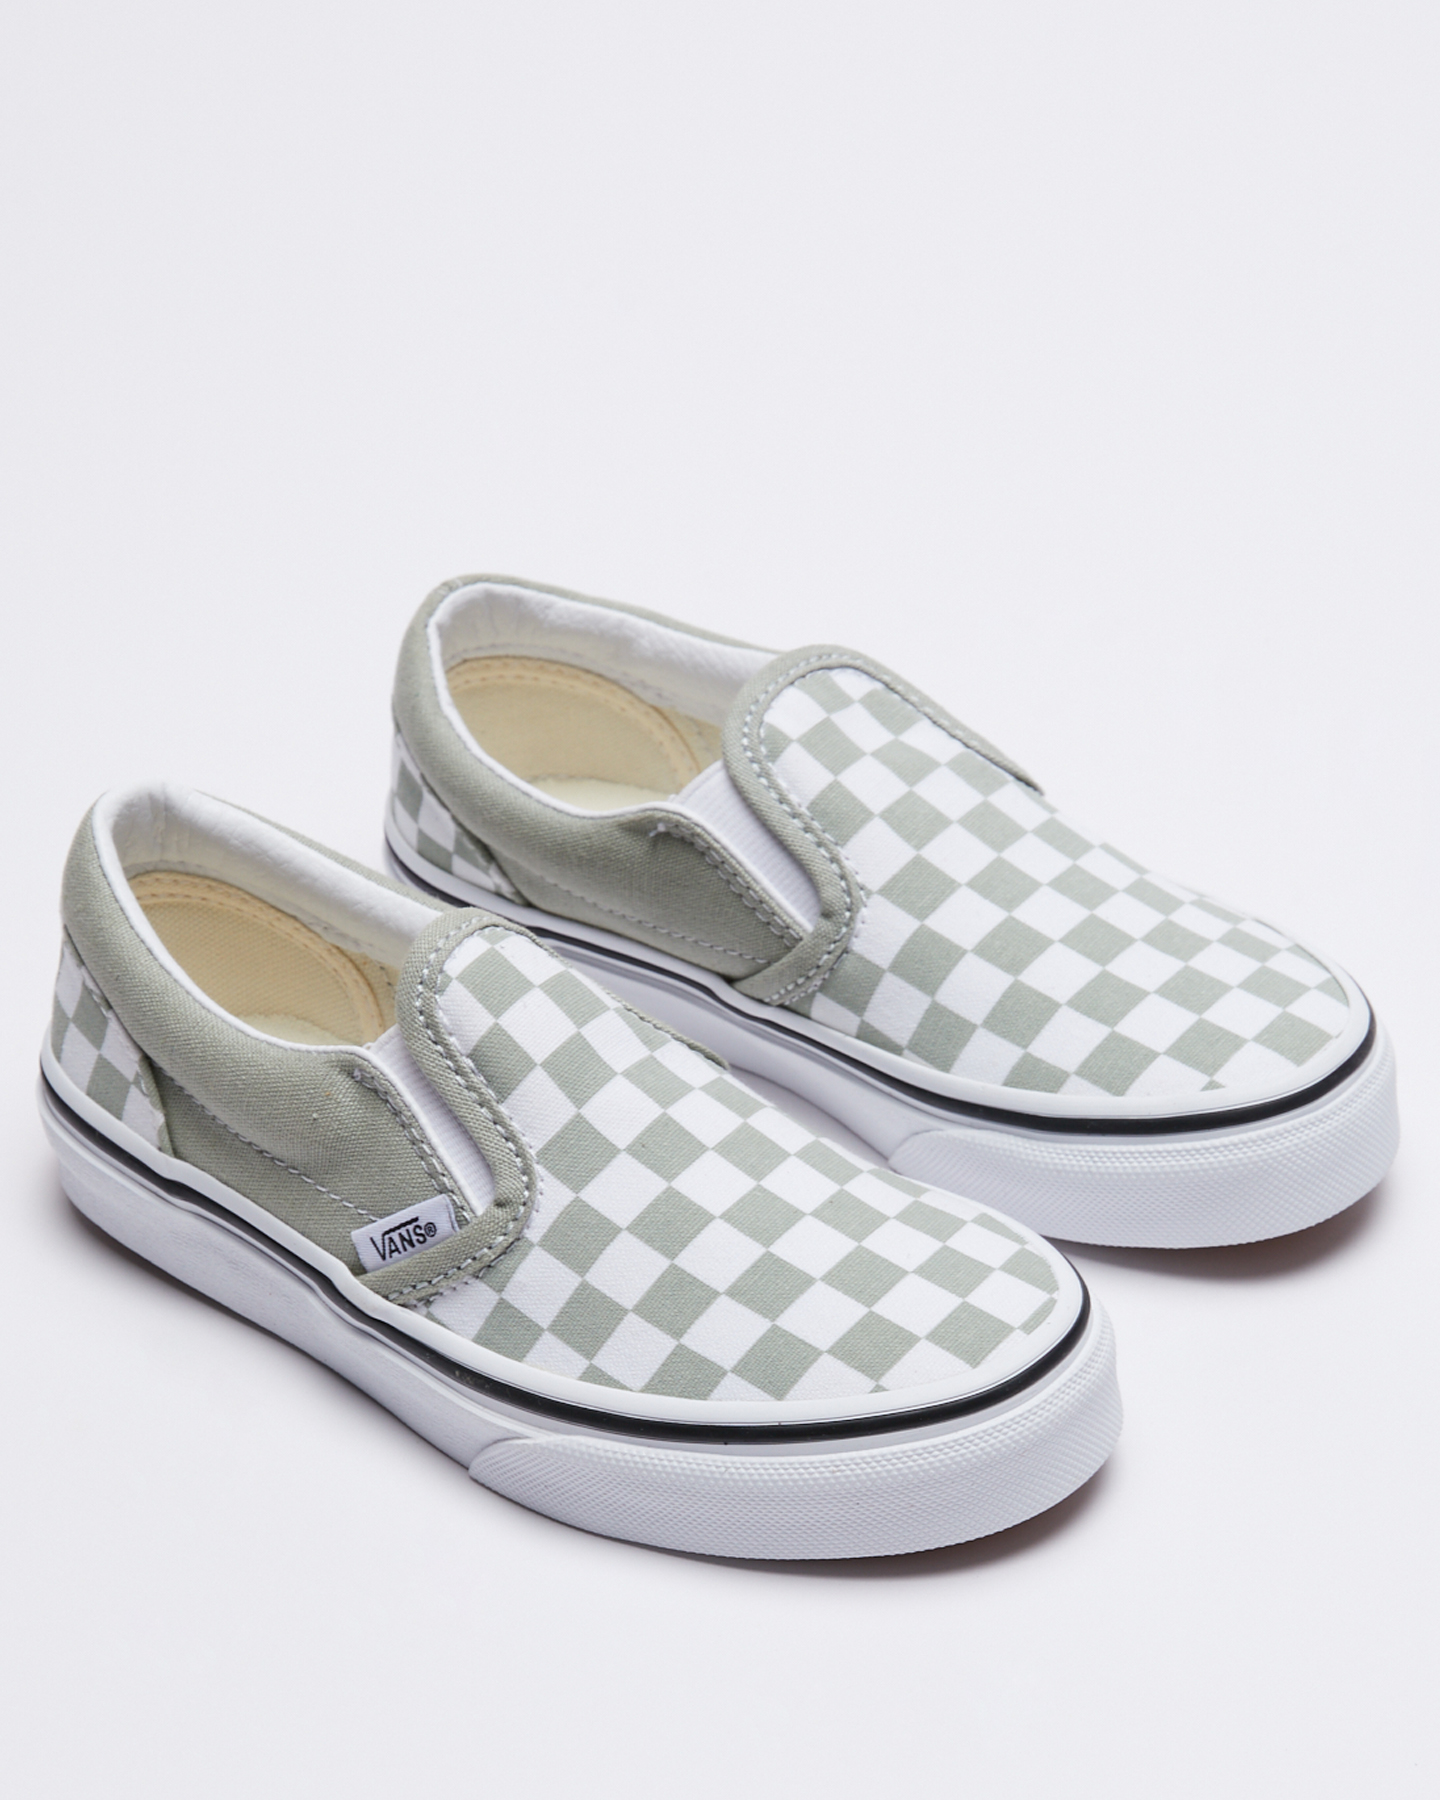 Vans Classic Color Theory Checkerboard Slip-On - Youth - Desert Sage ...